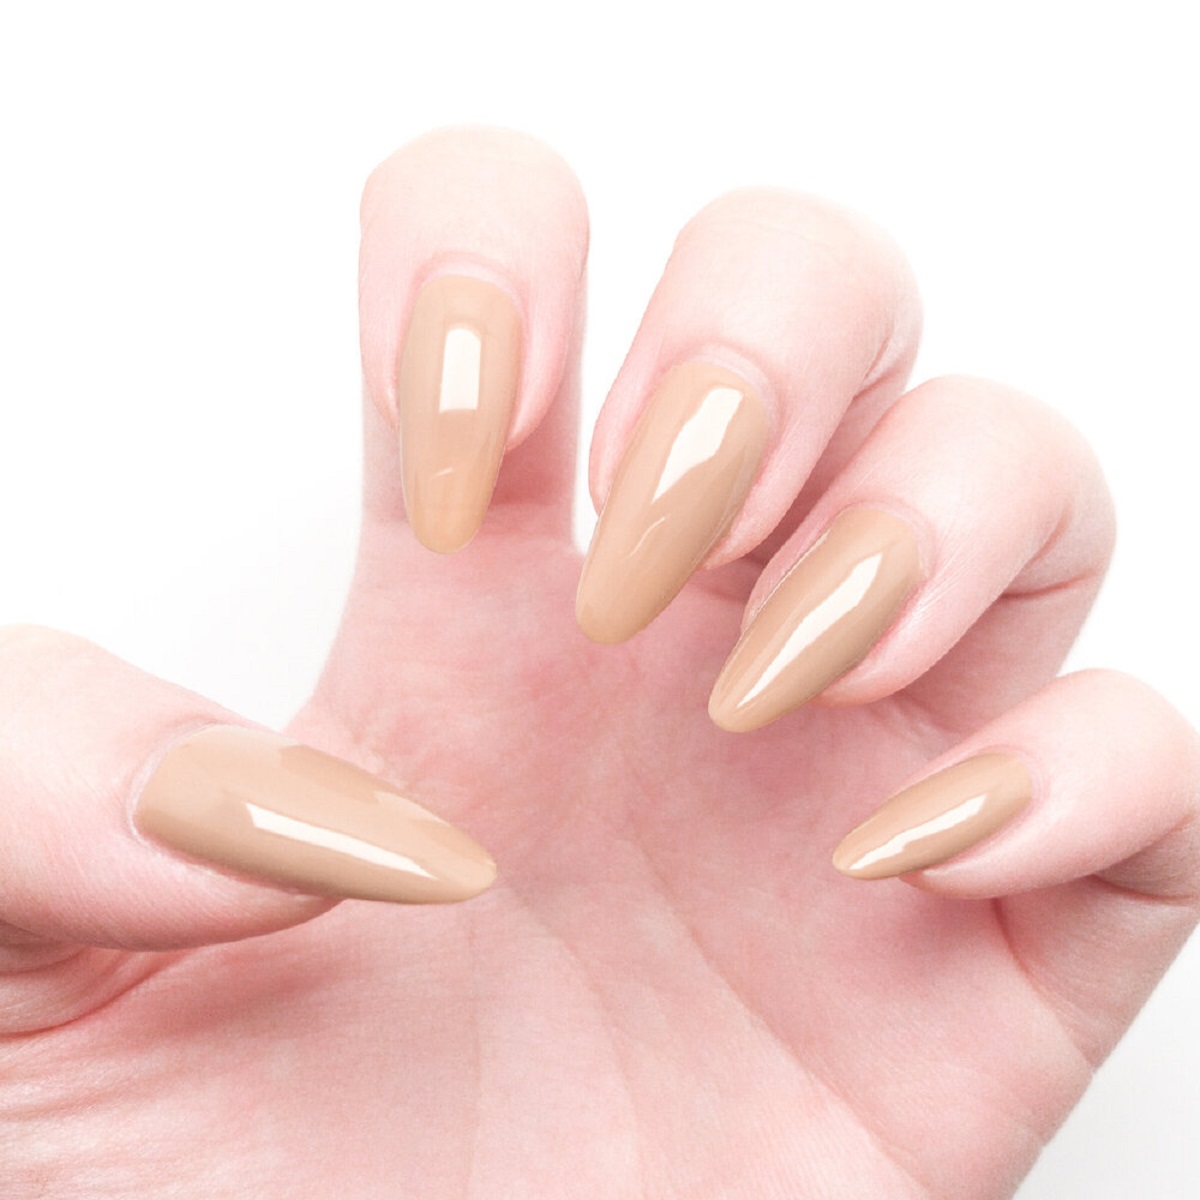 Tips To Have Strong and Healthy Nails